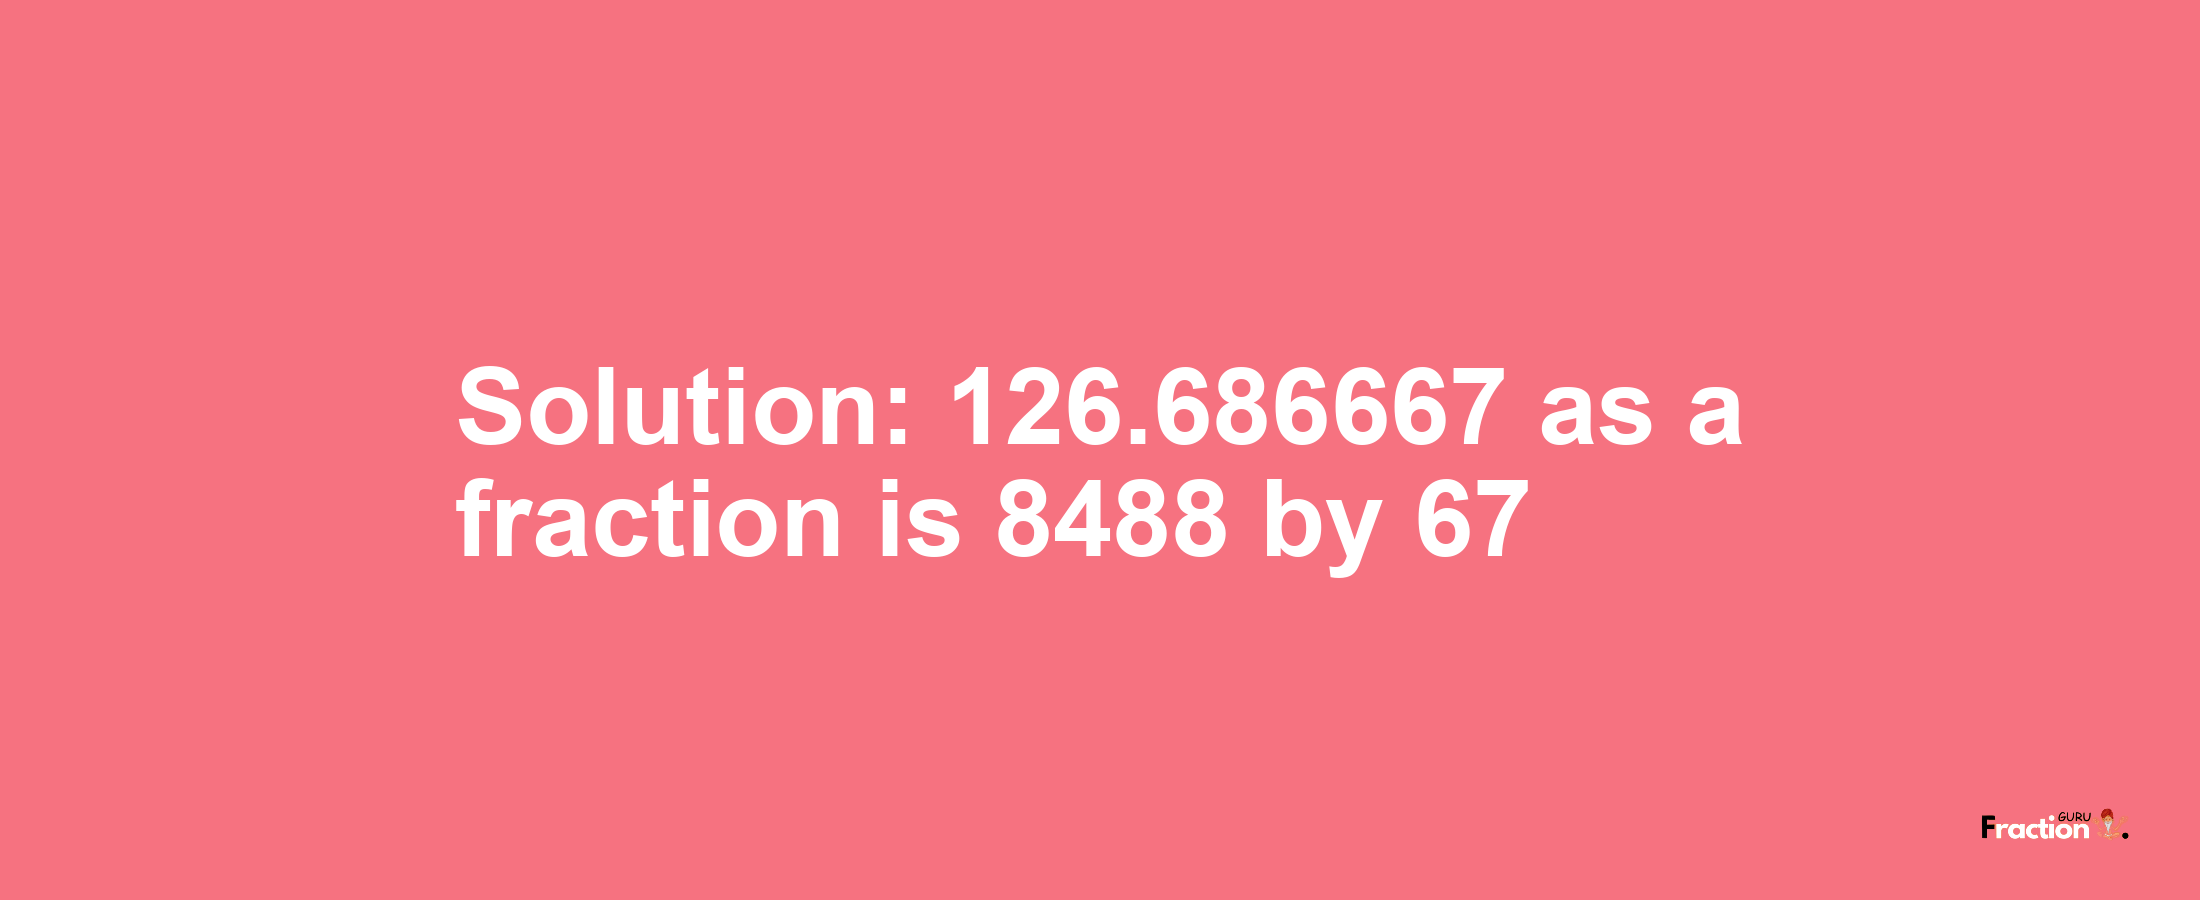 Solution:126.686667 as a fraction is 8488/67